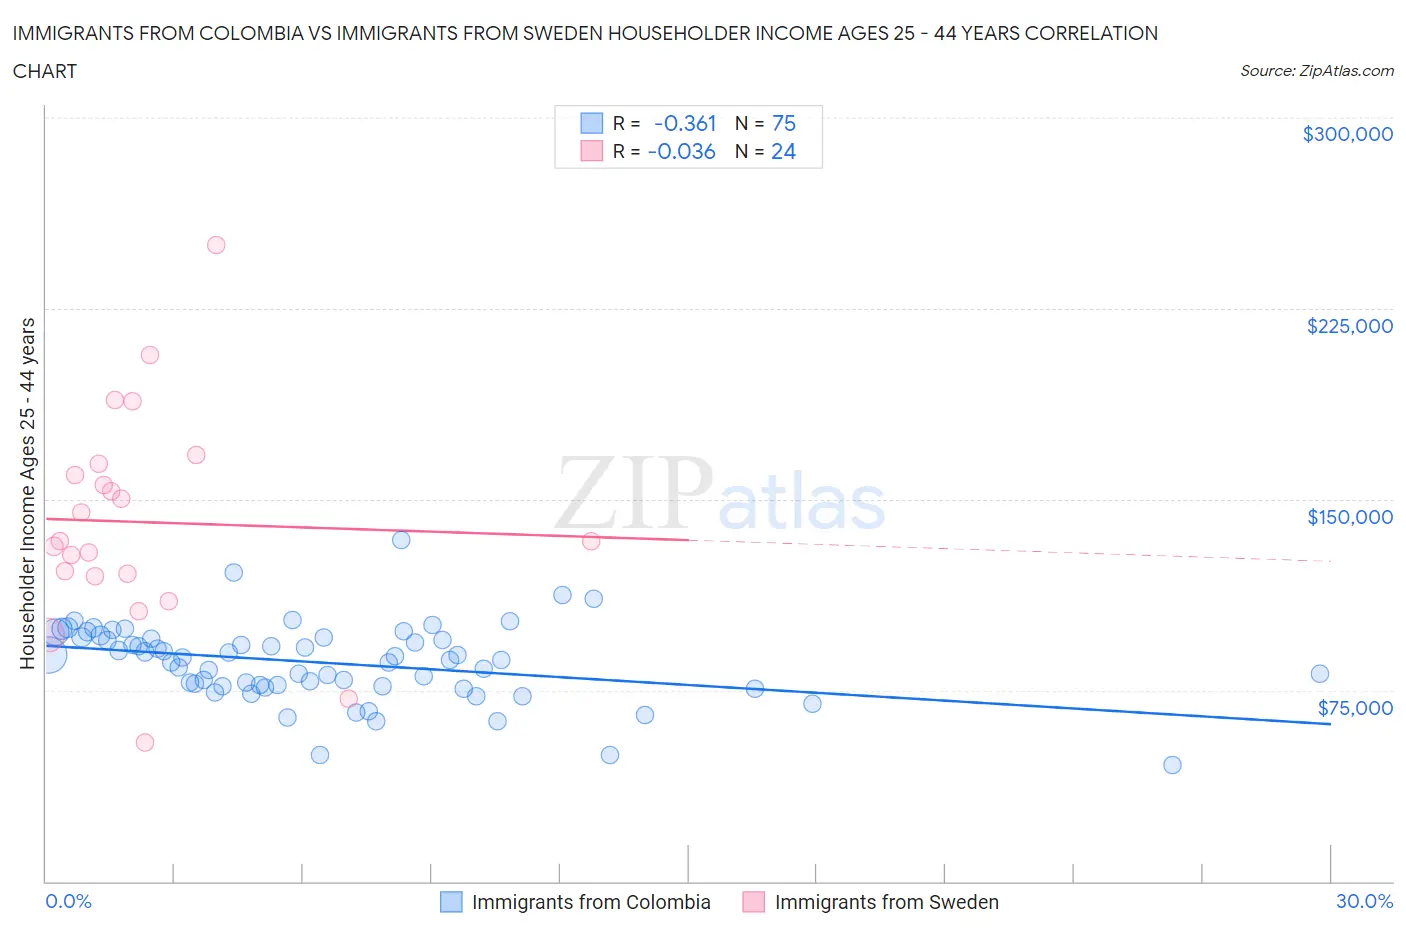 Immigrants from Colombia vs Immigrants from Sweden Householder Income Ages 25 - 44 years